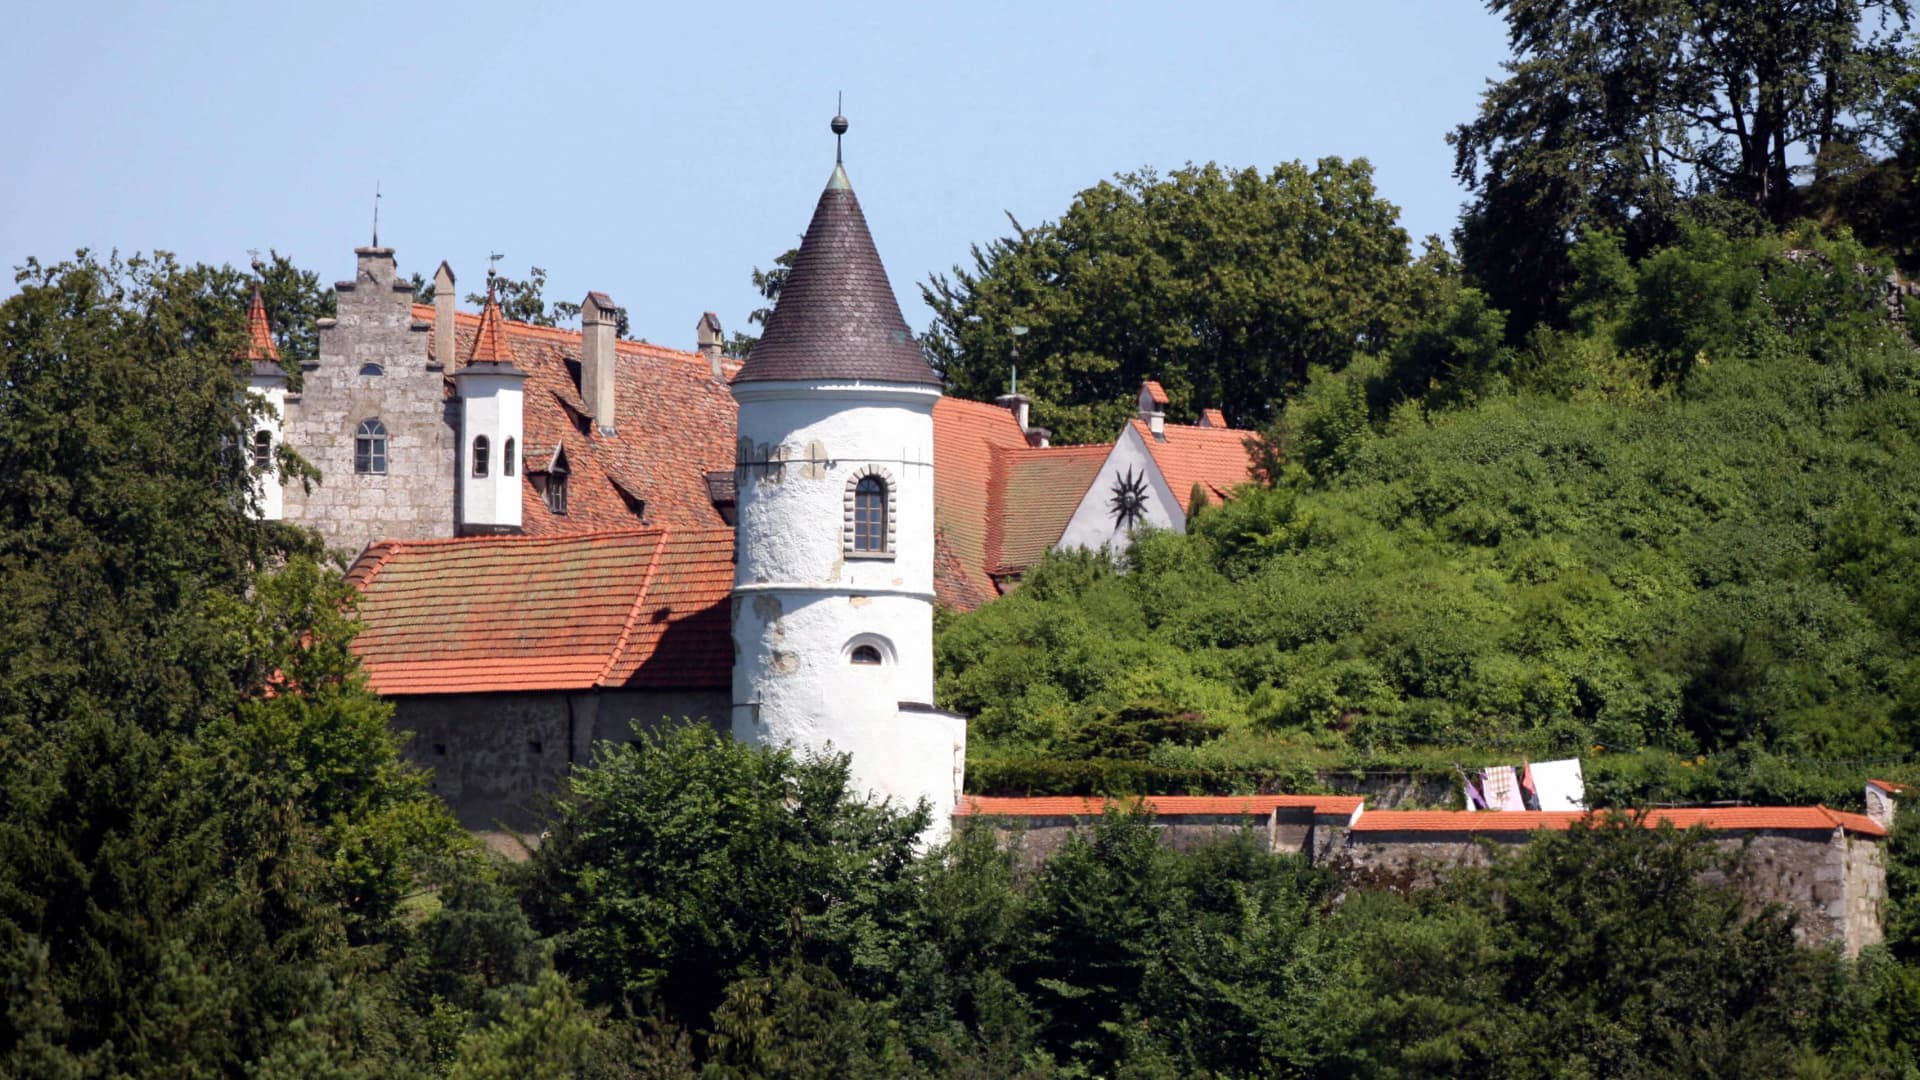 The Neidstein castle near Etzelwang, southern Germany, owned by Hollywood actor Nicolas Cage. He reportedly paid $2.6 million for the pied-a-terre, which dates back to the 16th century.